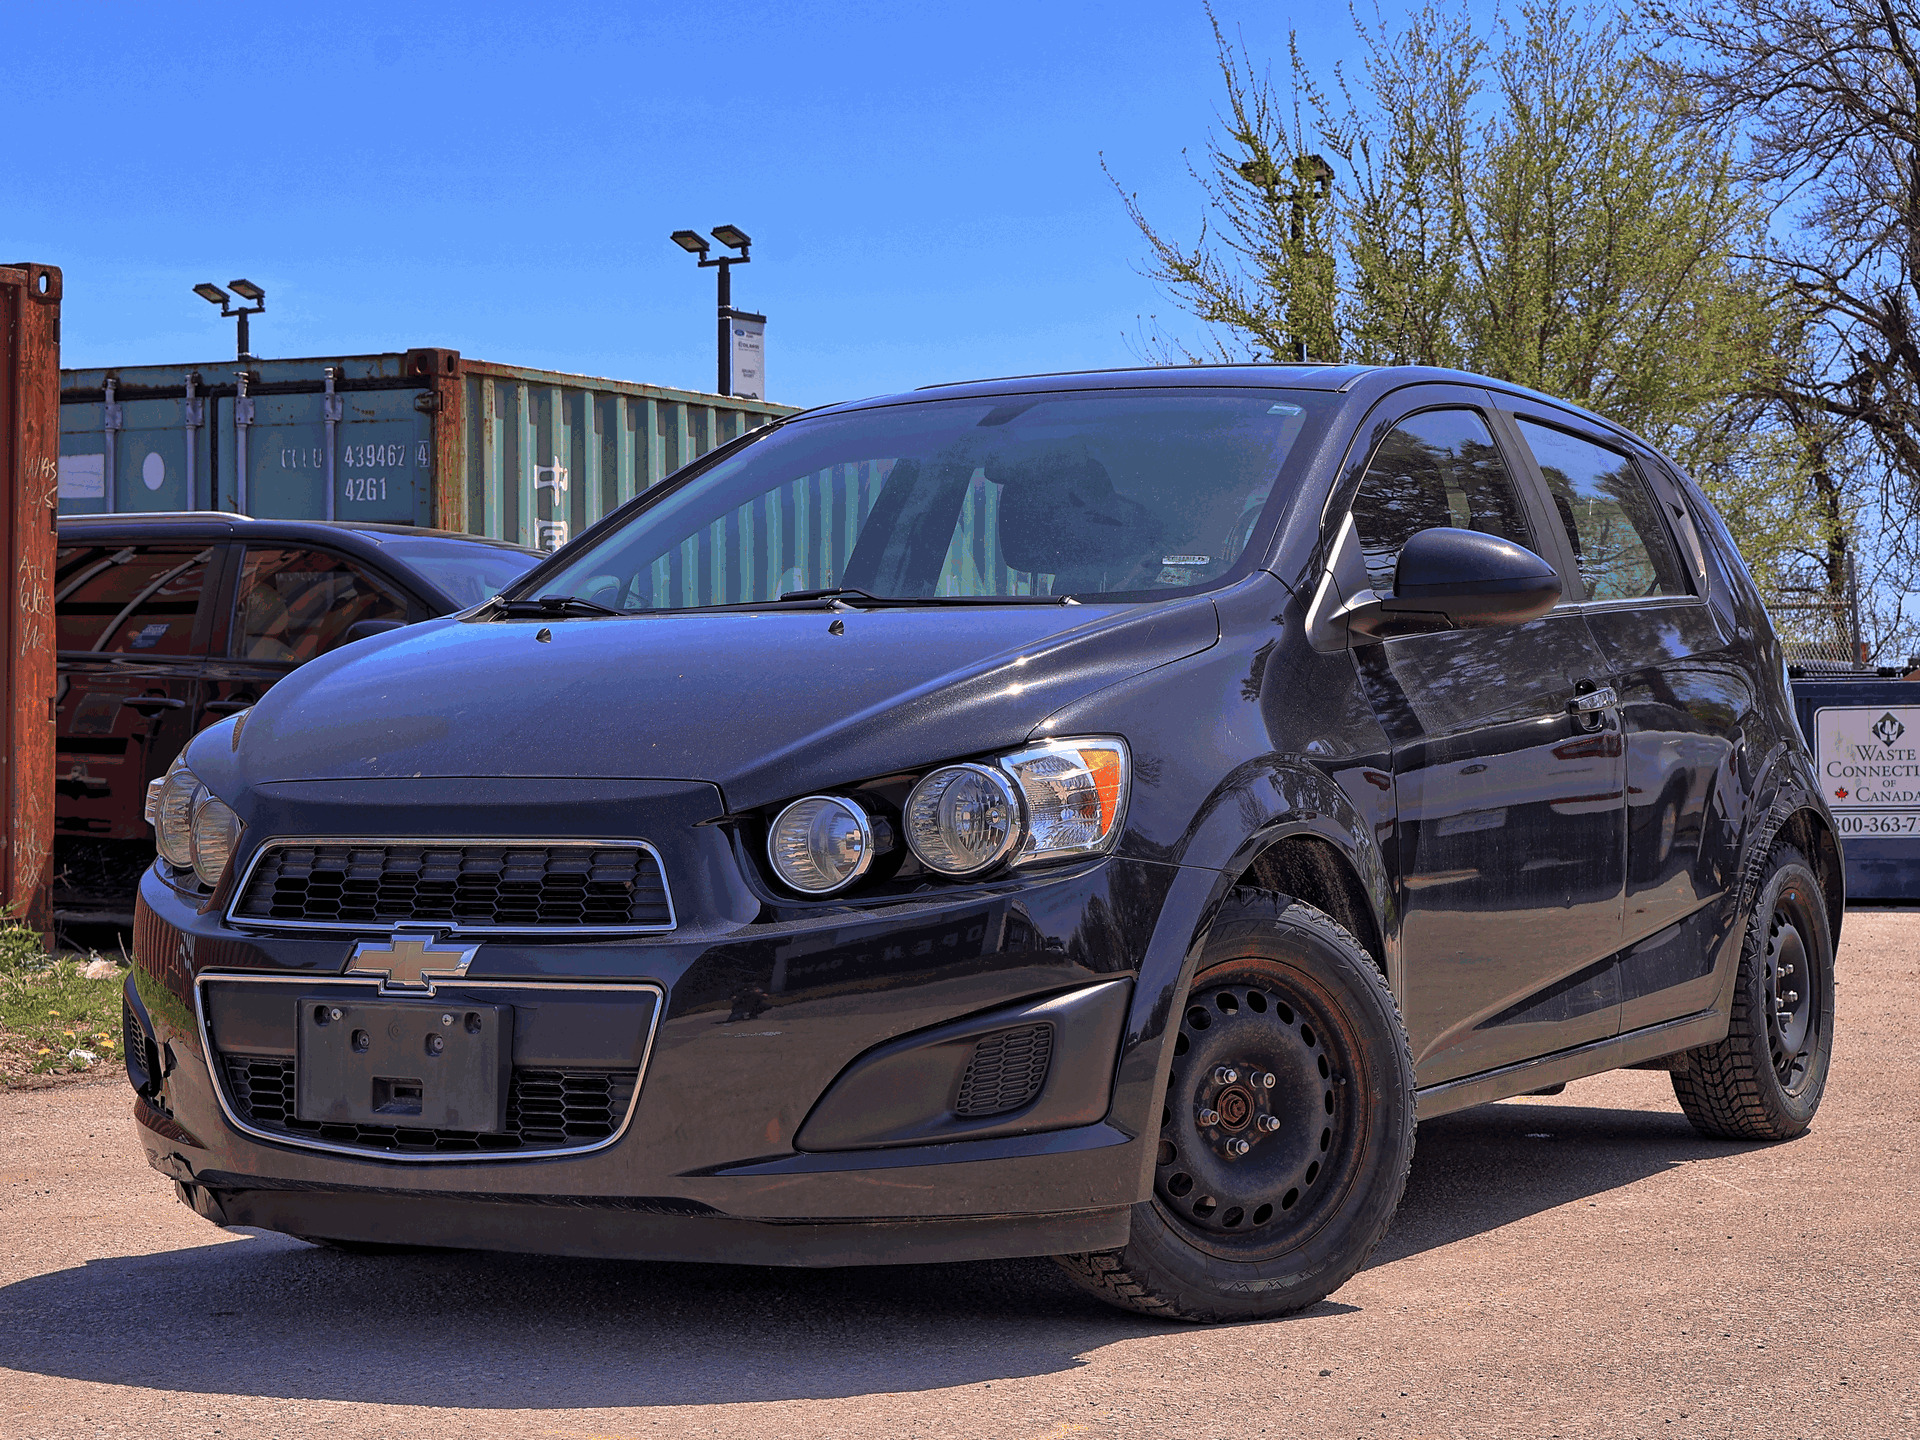 2014 Chevrolet Sonic LT | Air Condition | Cruise | Heated Seat